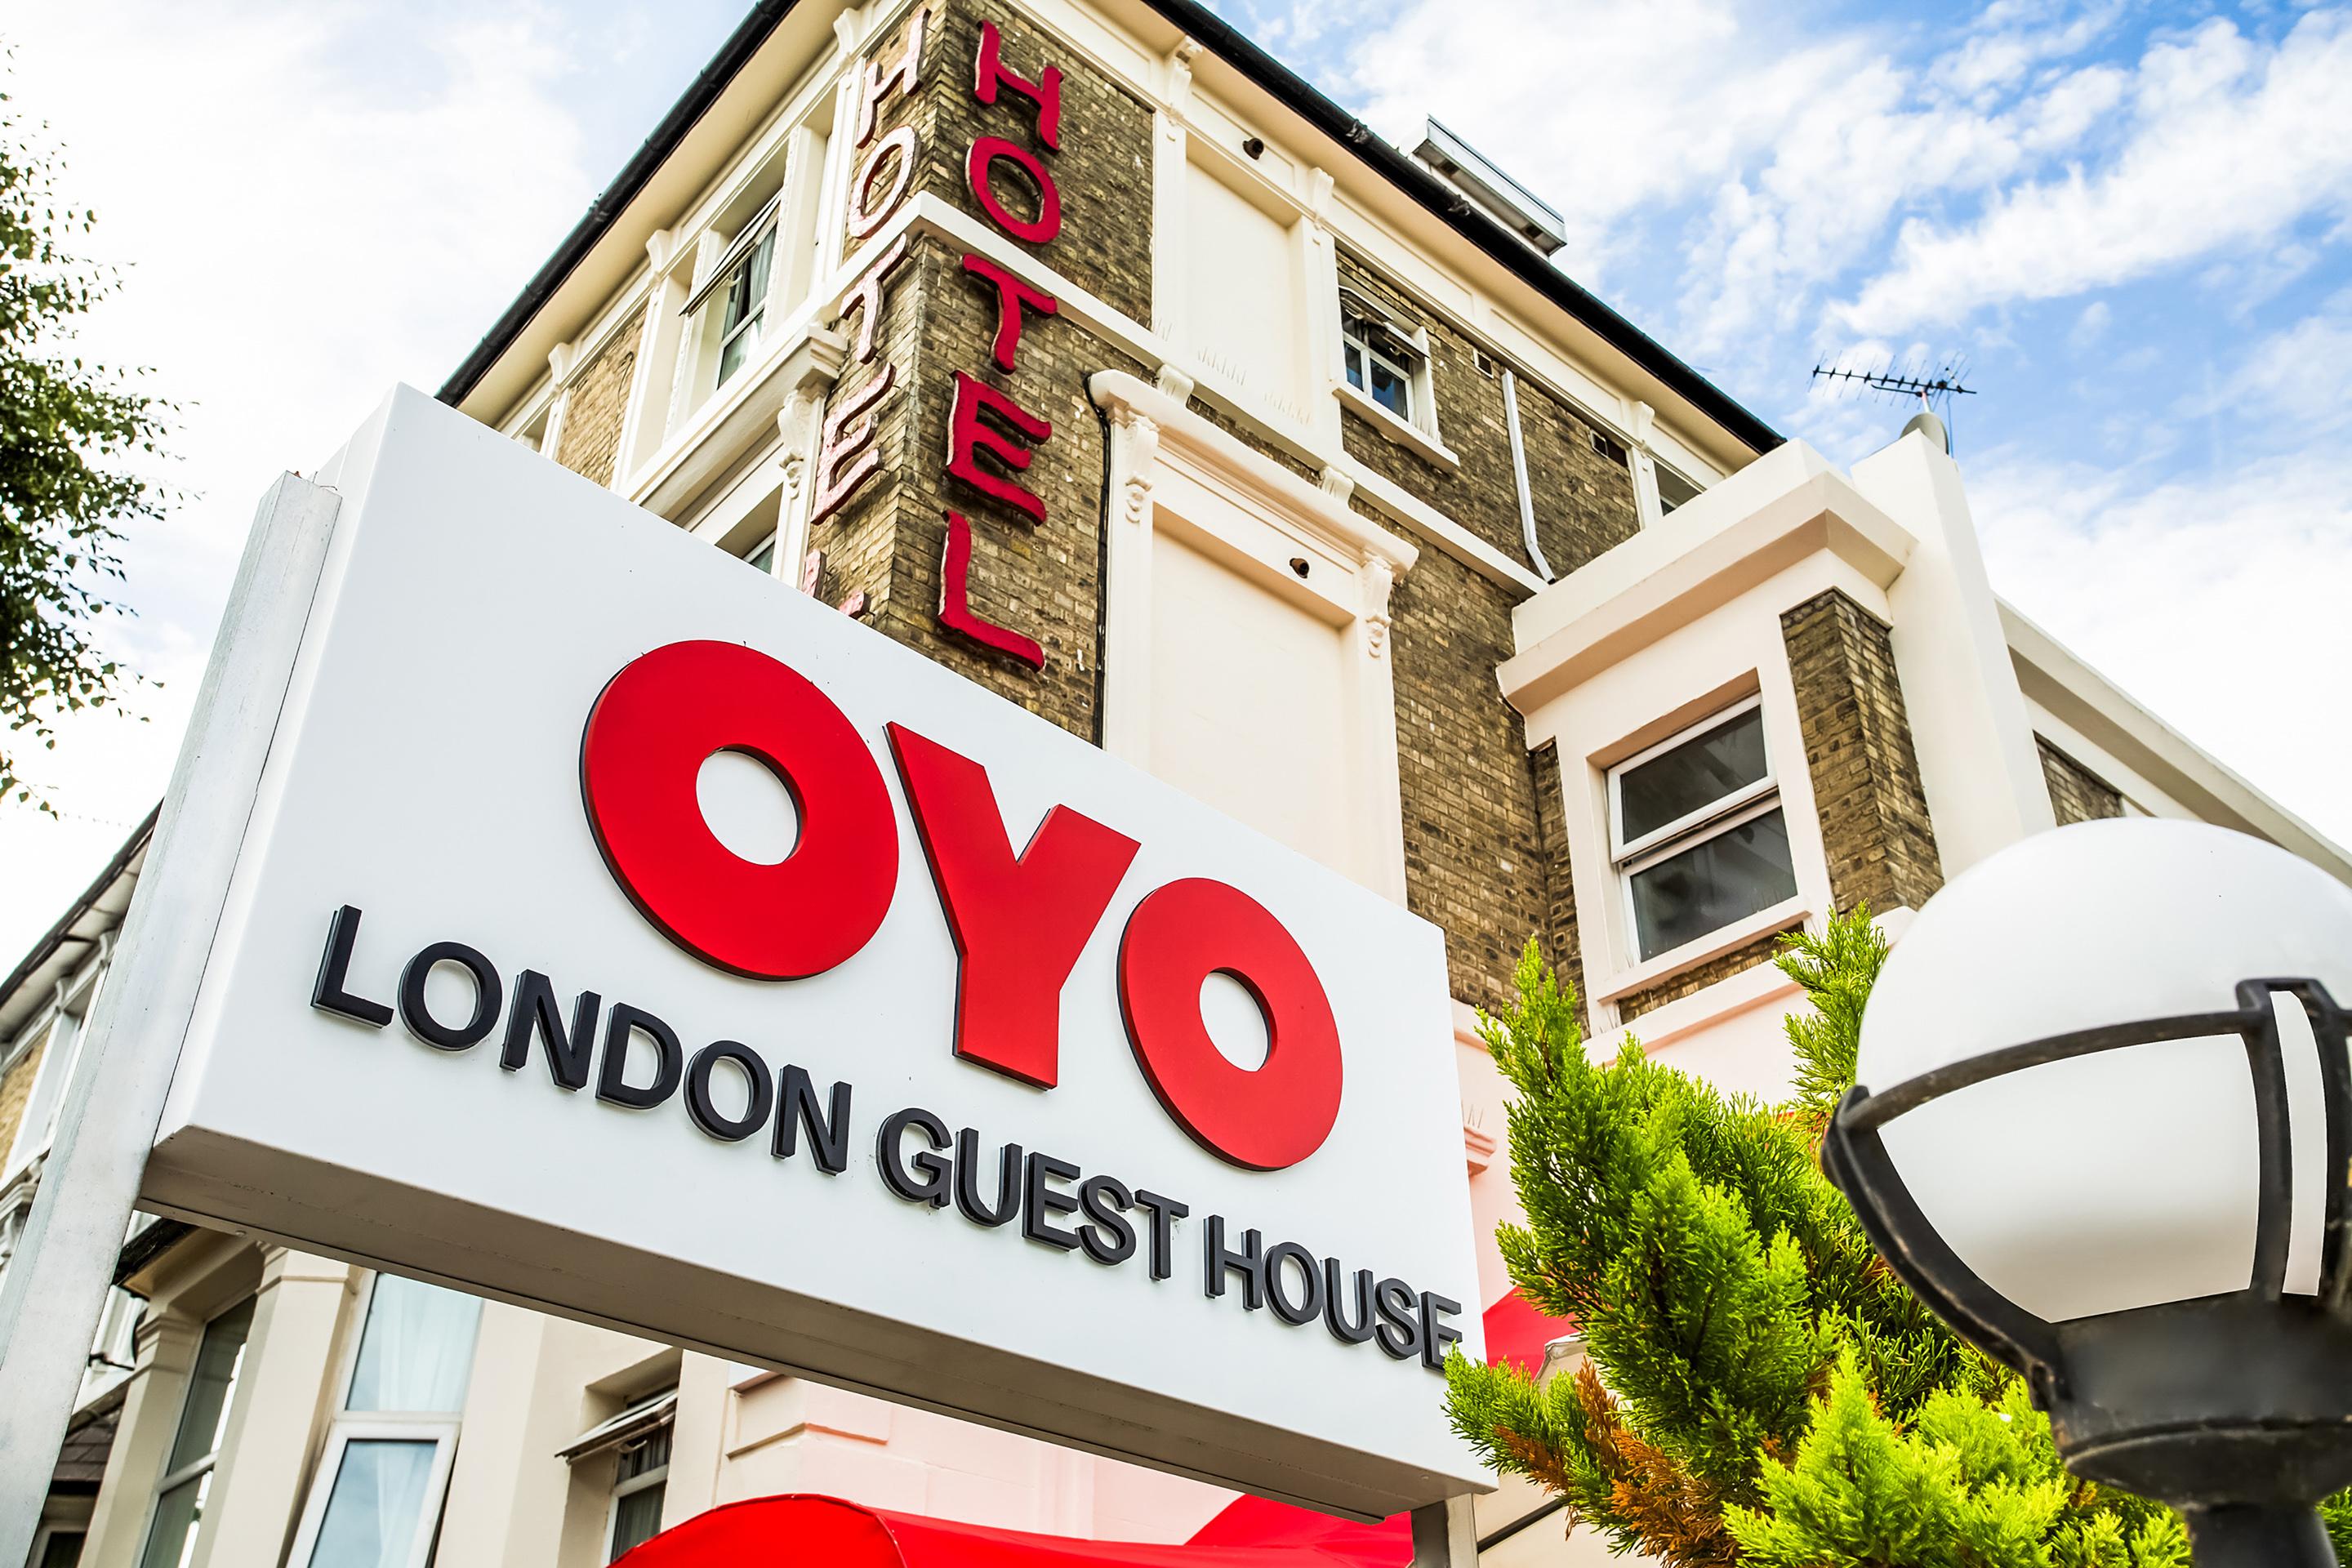 Oyo London Guest House Exterior photo